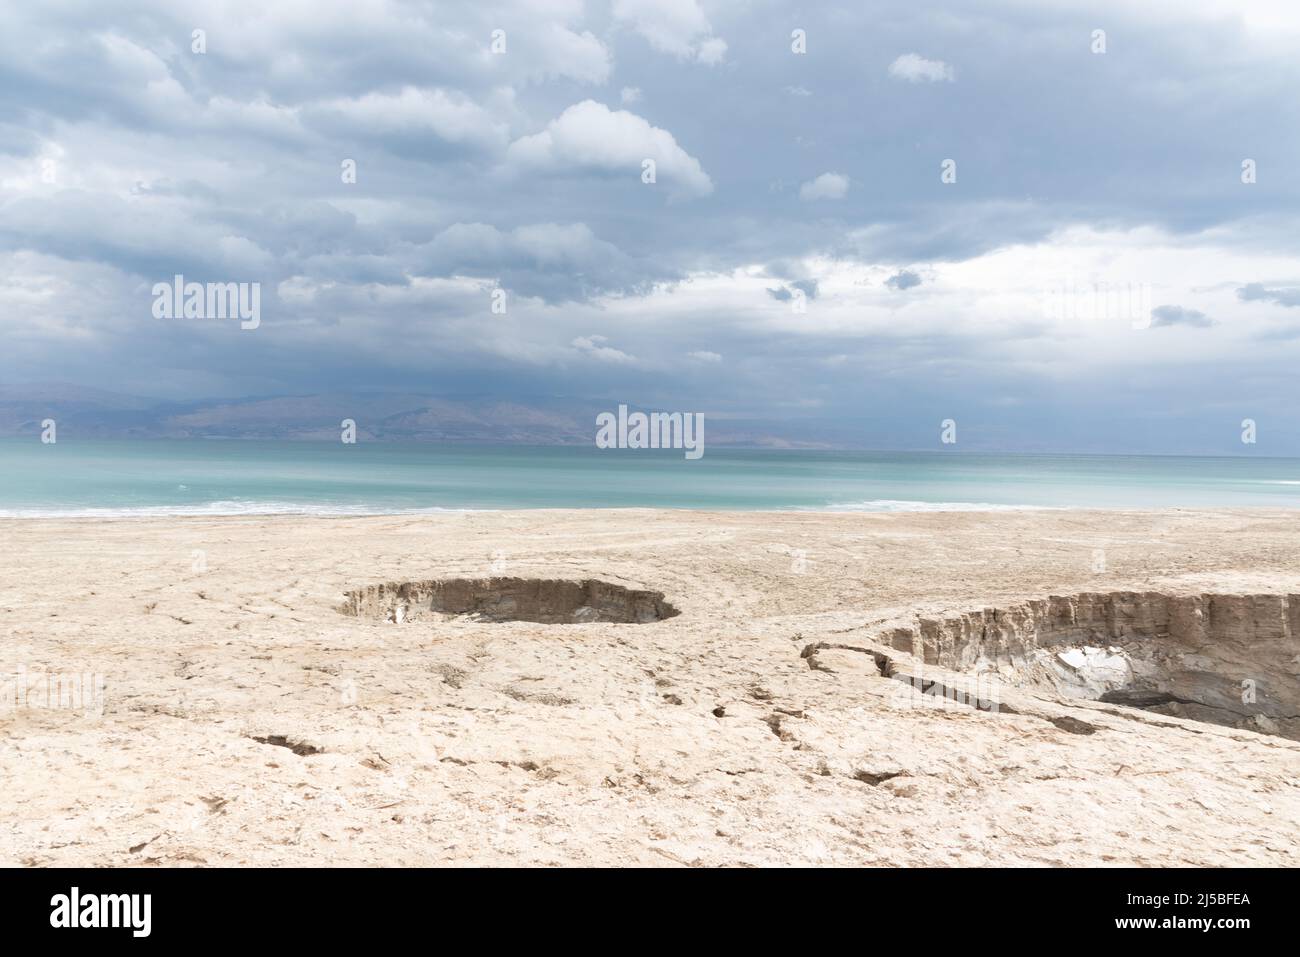 Sinkhole filled with turquoise water, near Dead Sea coastline. Hole formed when underground salt is dissolved by freshwater intrusion, due to continuing sea-level drop. . High quality photo Stock Photo